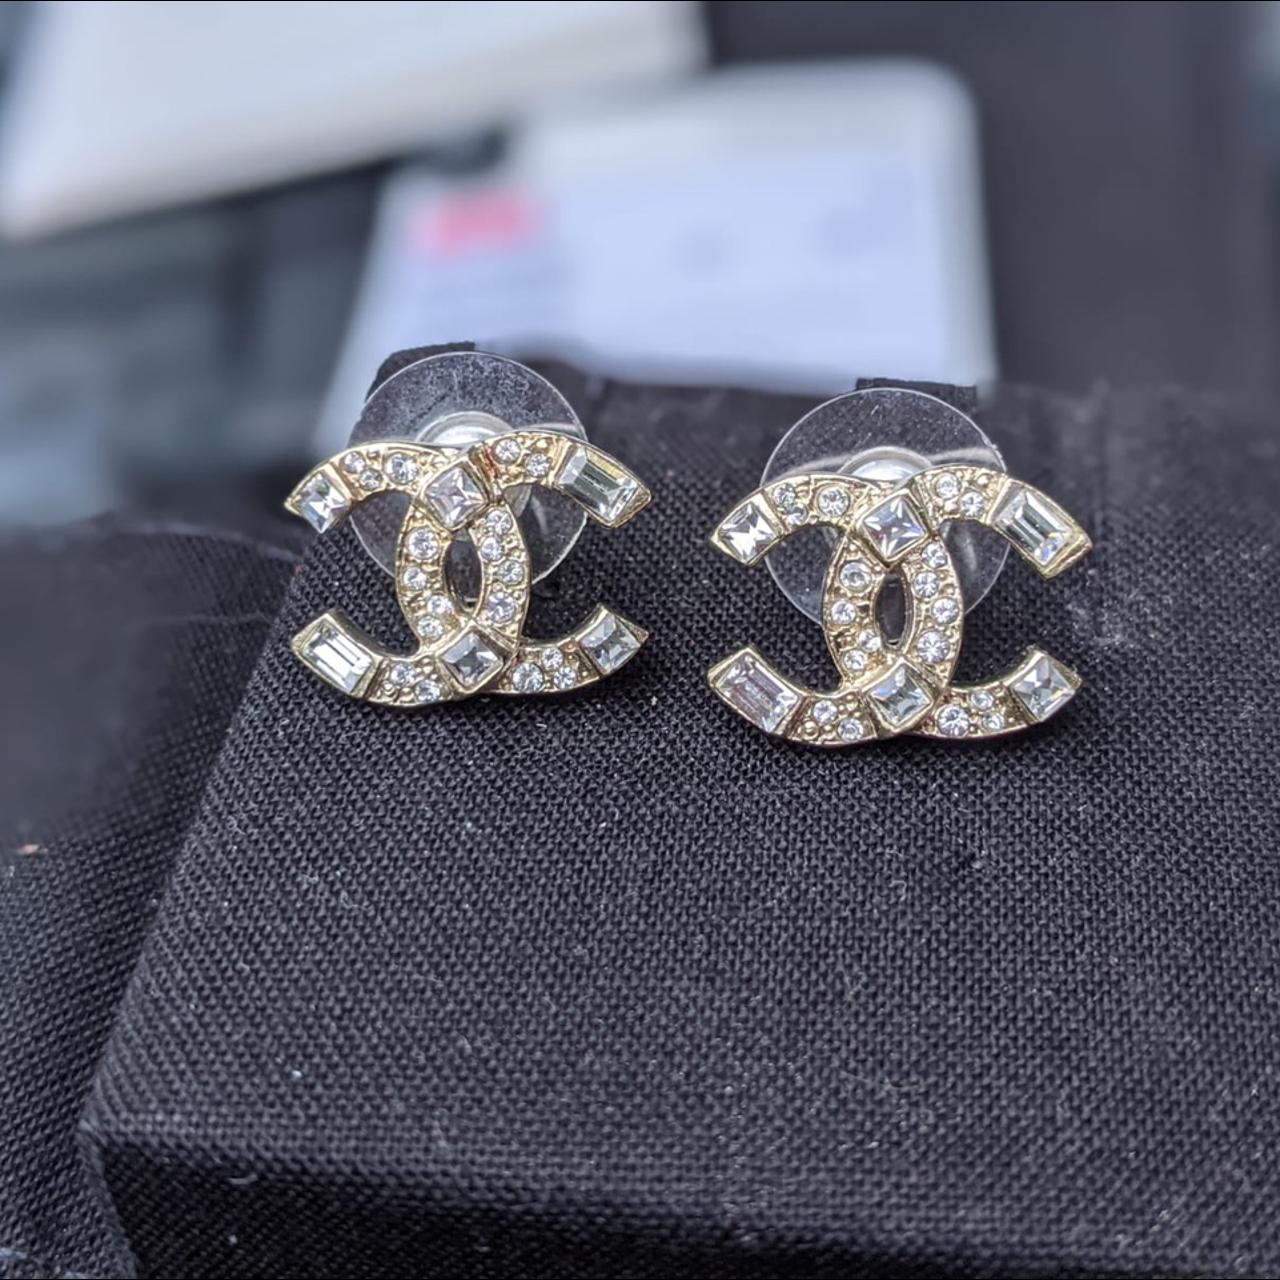 Authentic Chanel CC logo Earrings with crystals